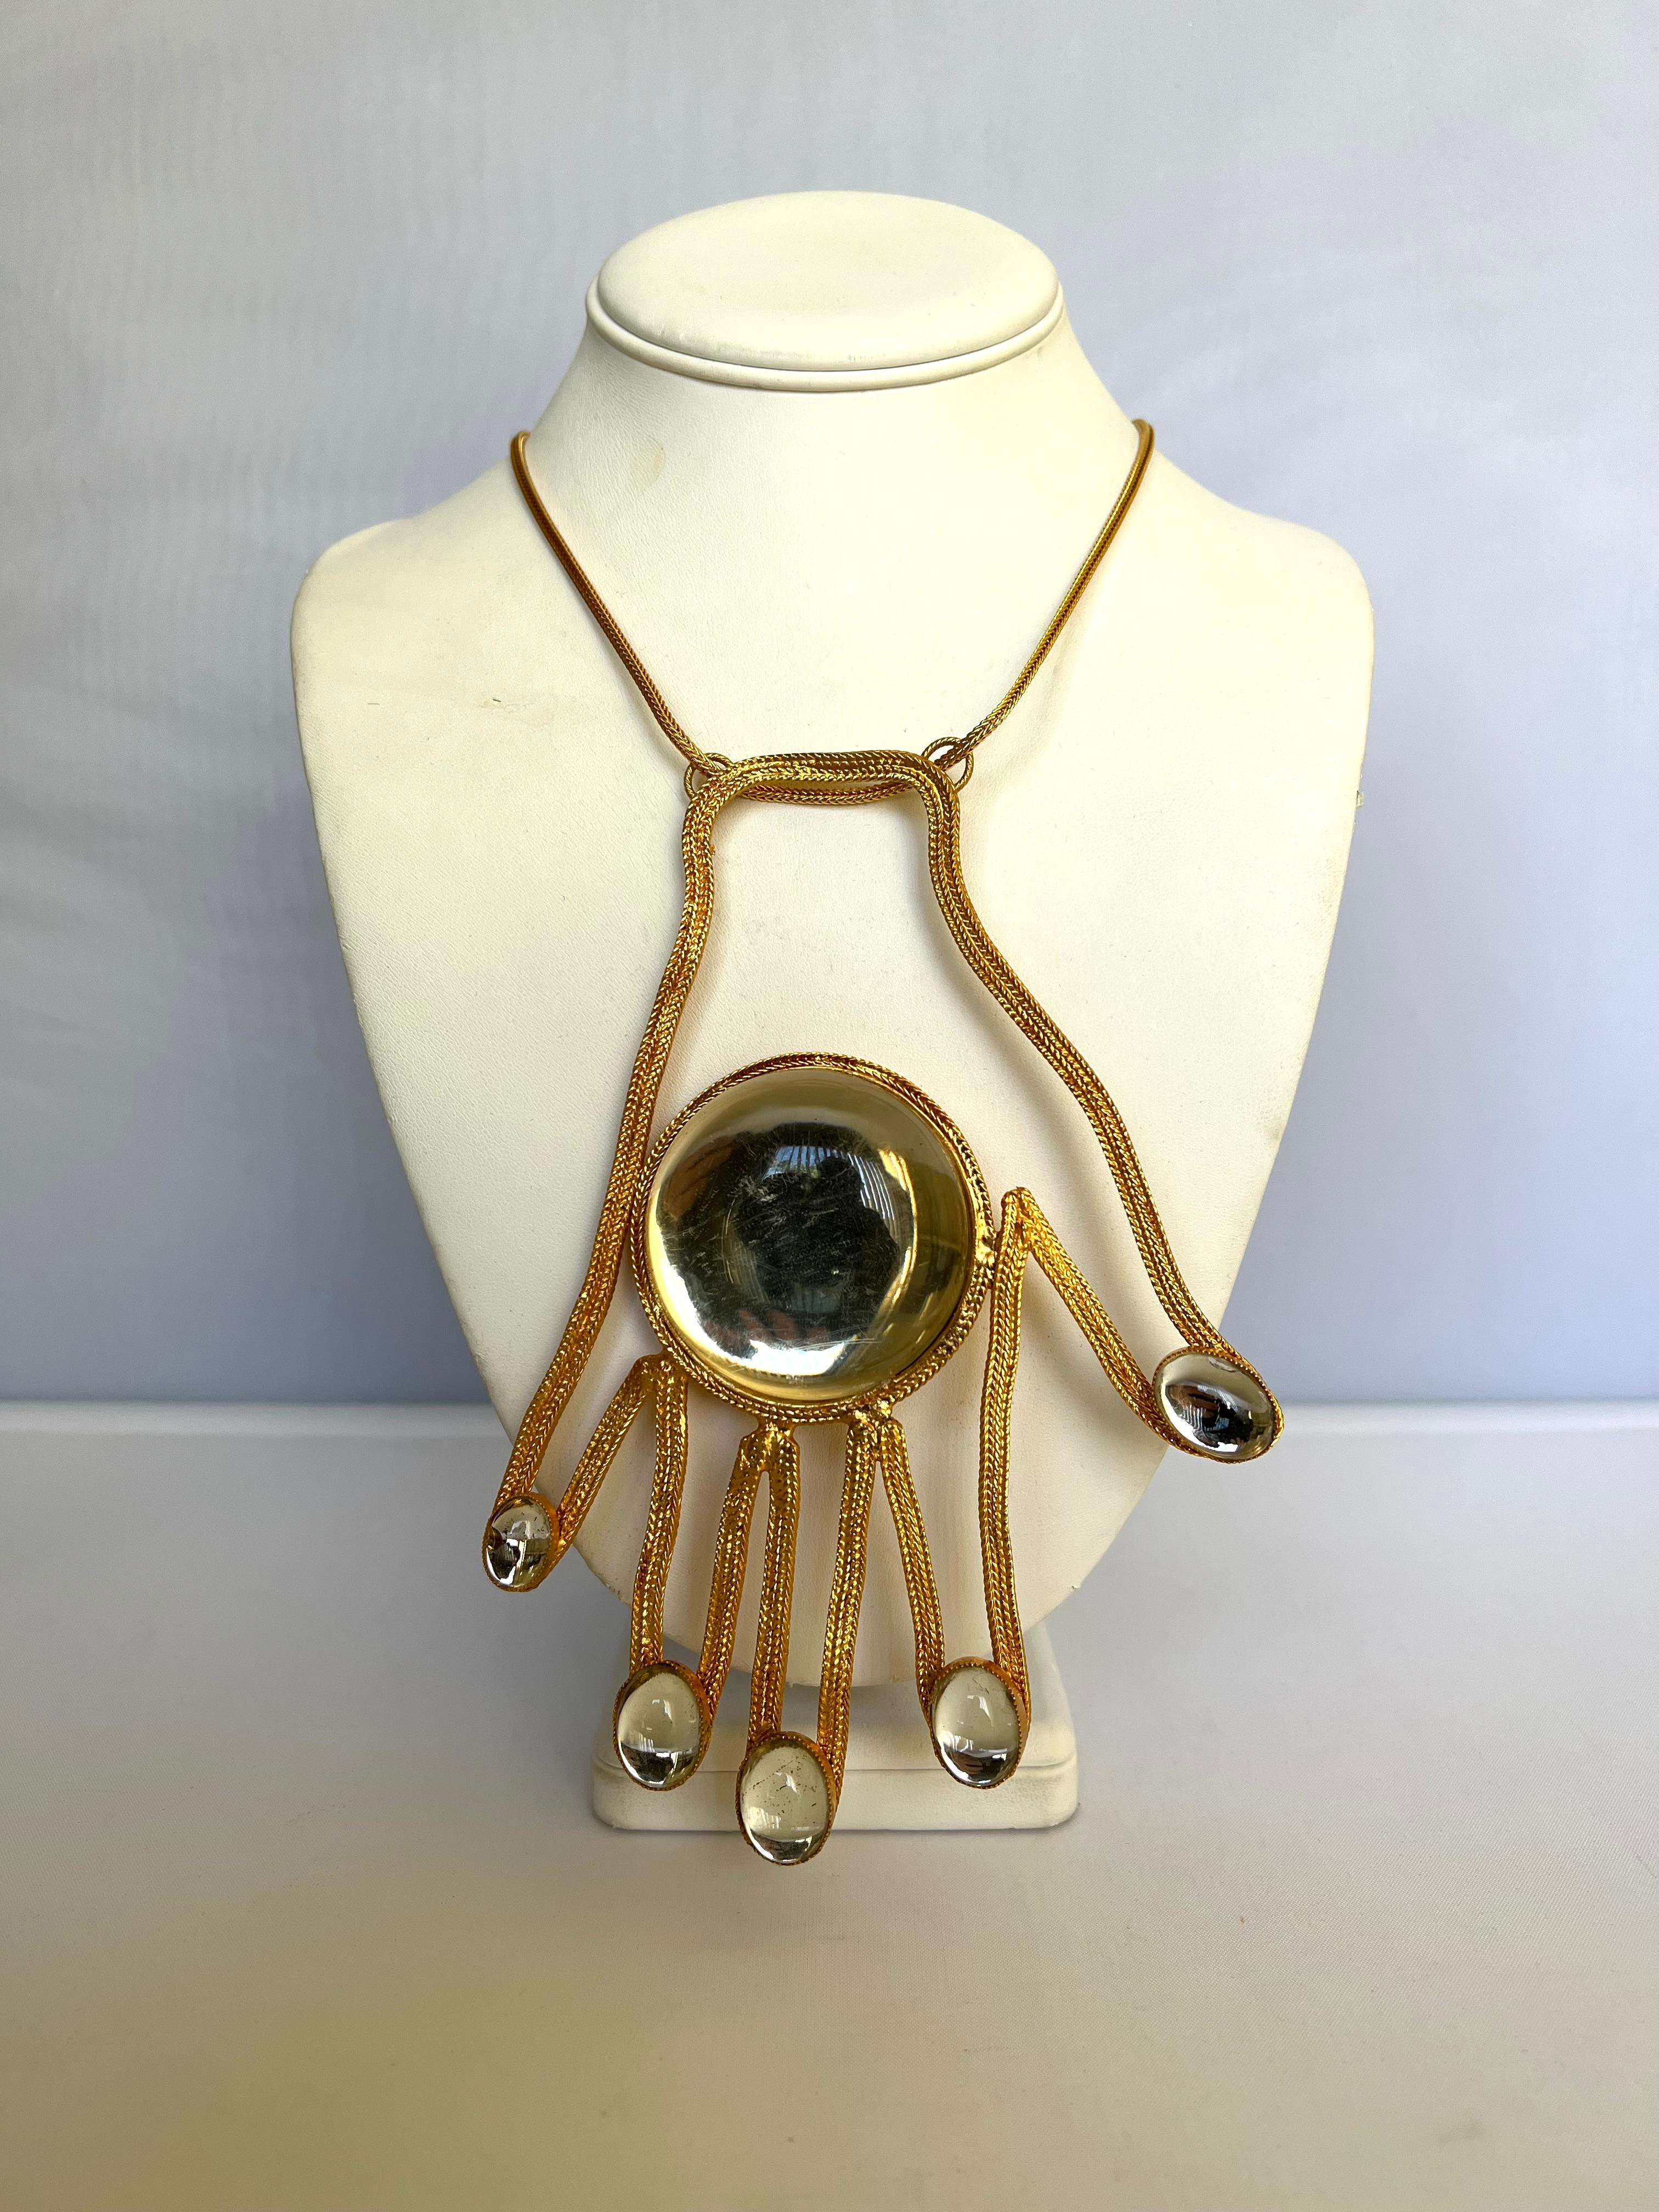 Scarce massive gold-plated pendant necklace featuring a large three-dimensional hand with jelly-belly elements. Signed, Robert F. Clark for William de Lillo ltd. New York, circa 1971. The necklace was featured in Vogue (April 1971); please see the